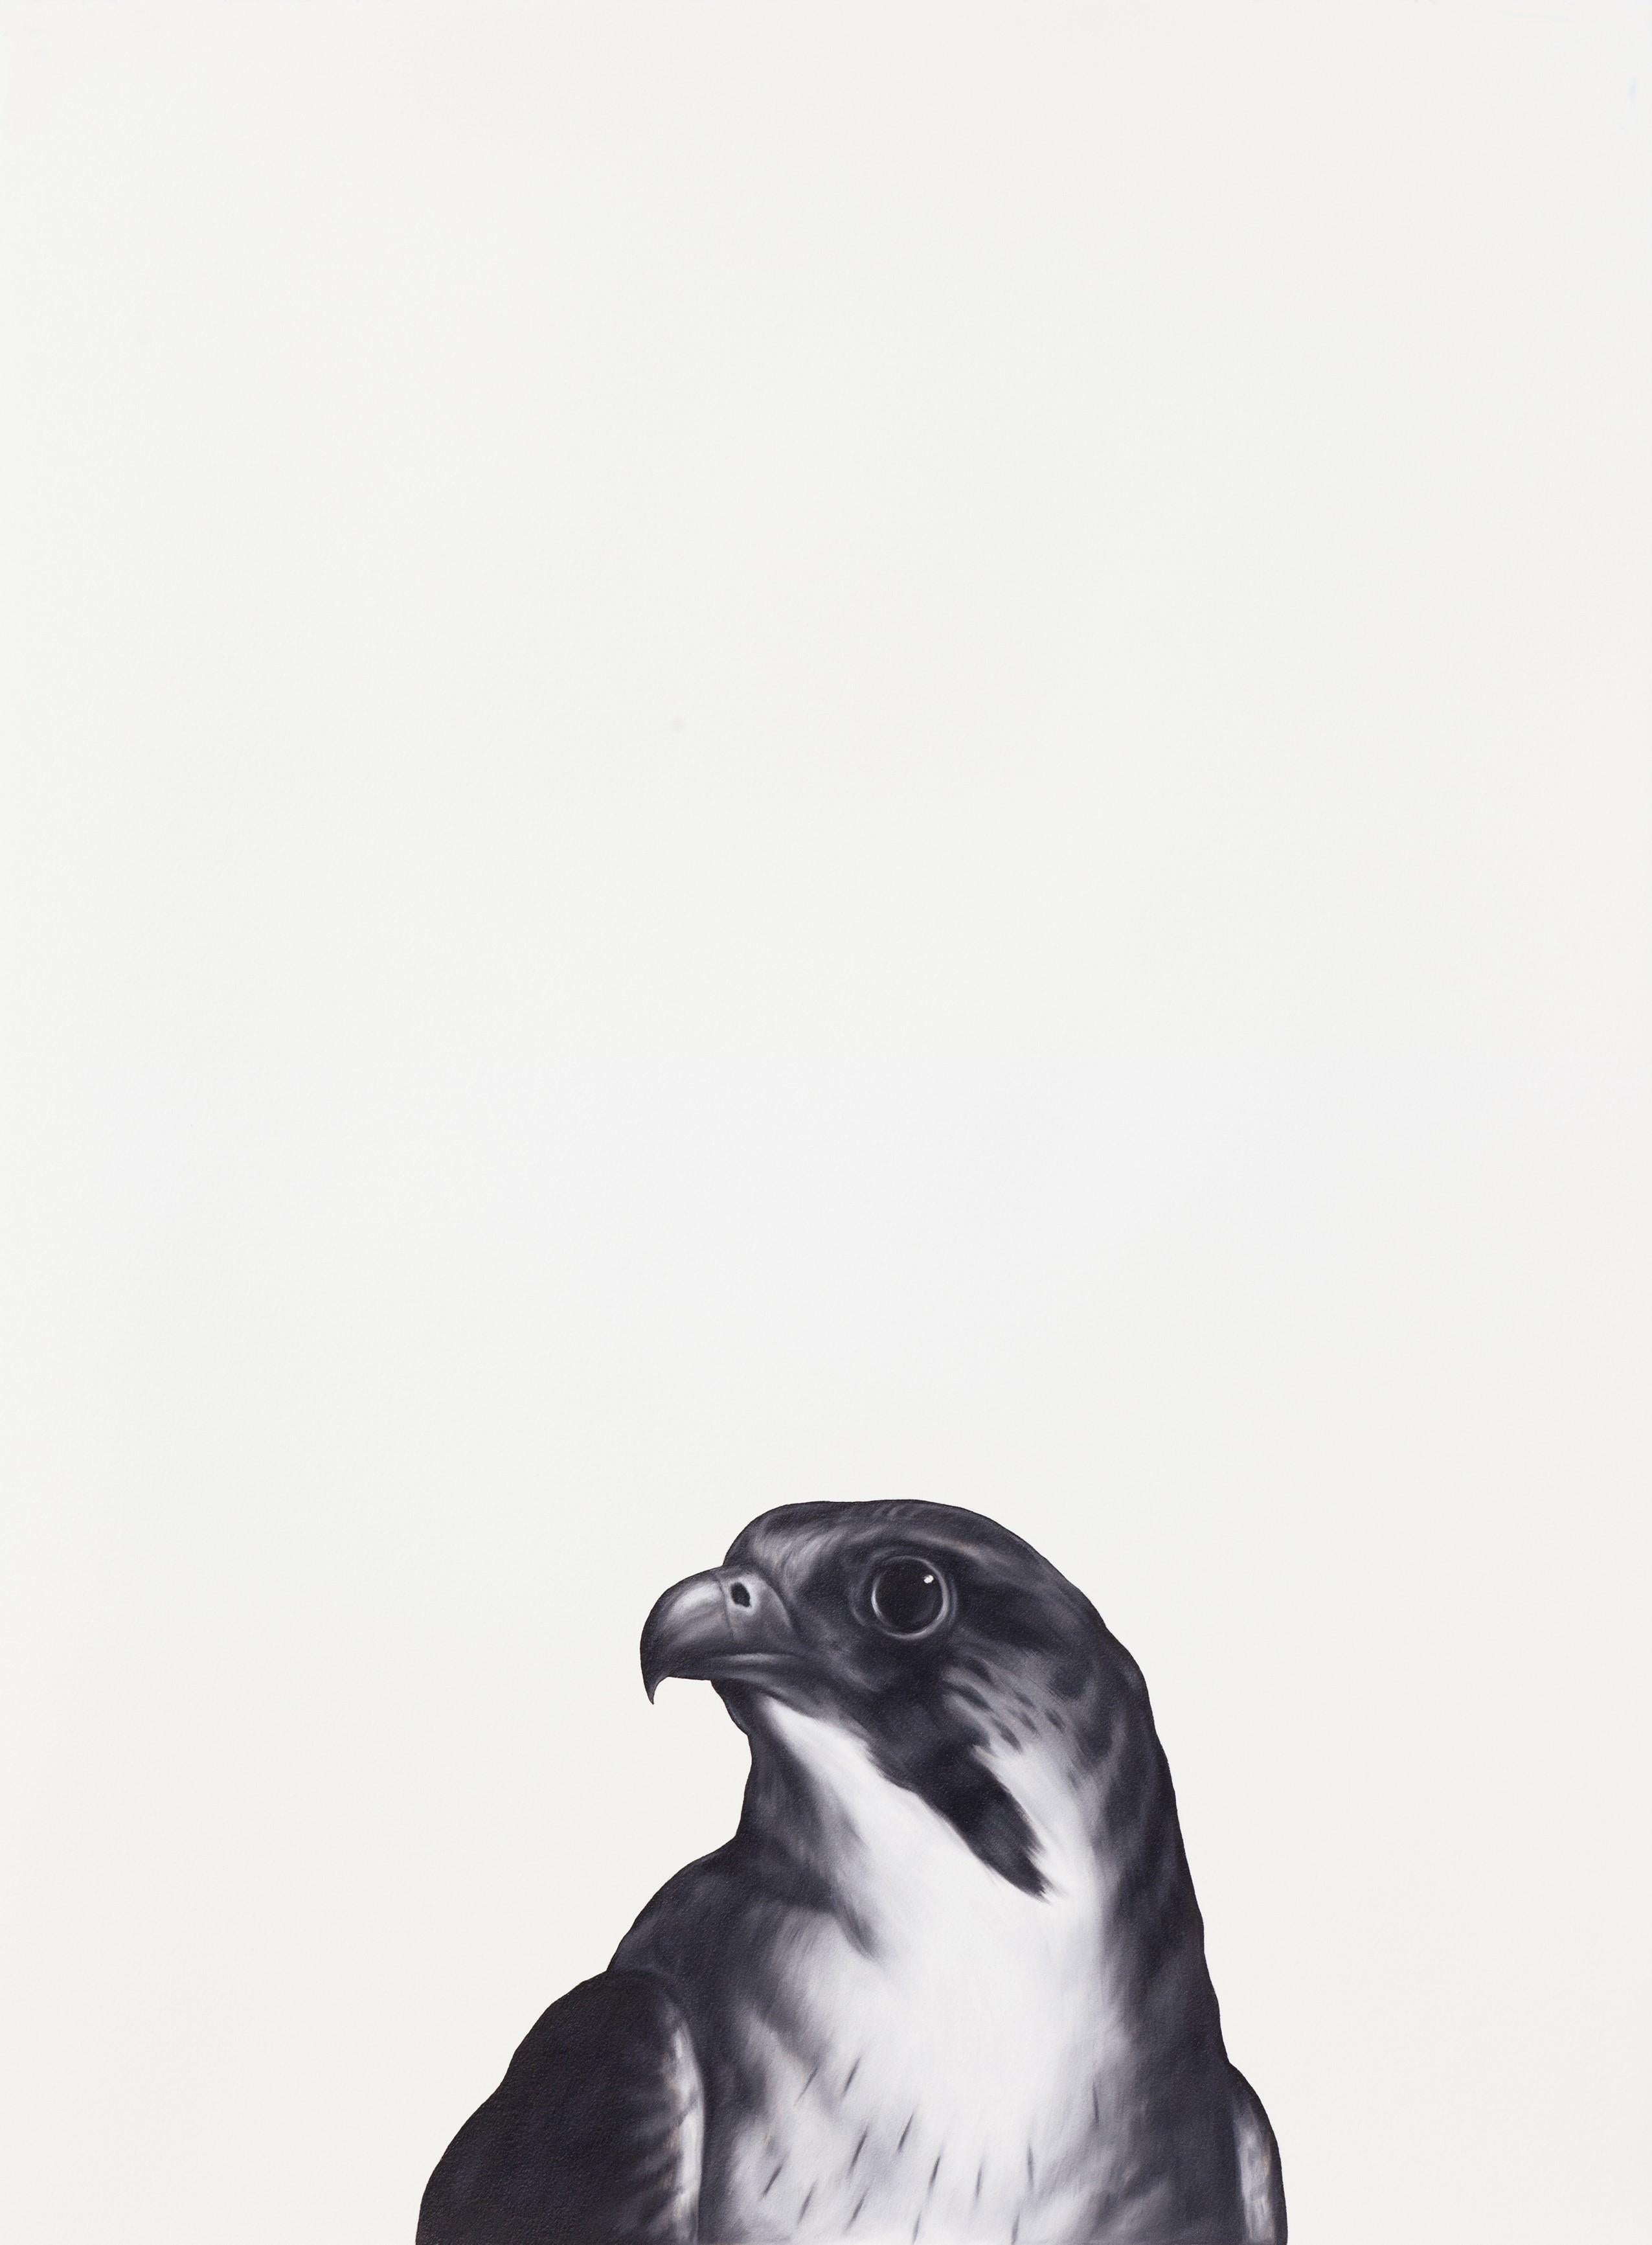 Falcon (after Landseer) - Painting by Shelley Reed